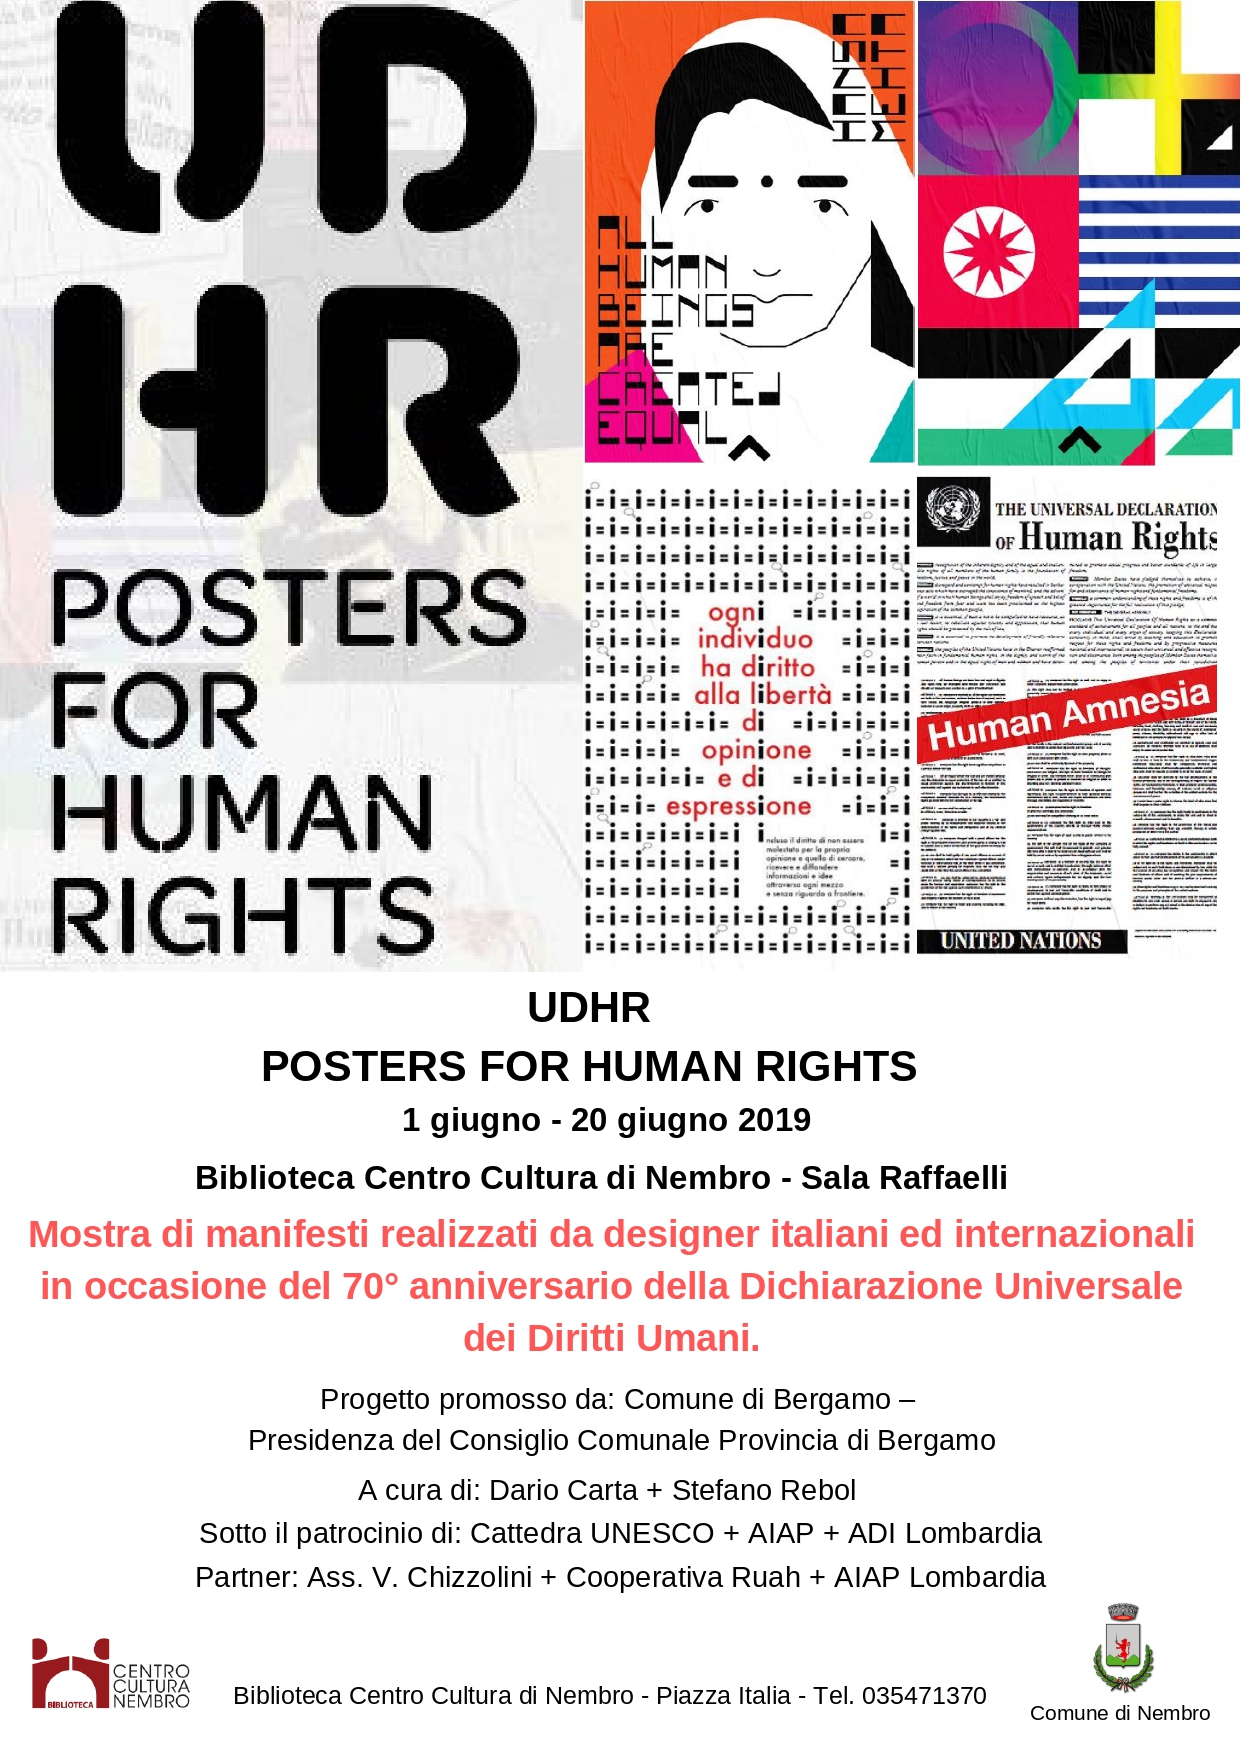 Immagine UDHR - POSTERS FOR HUMAN RIGHTS